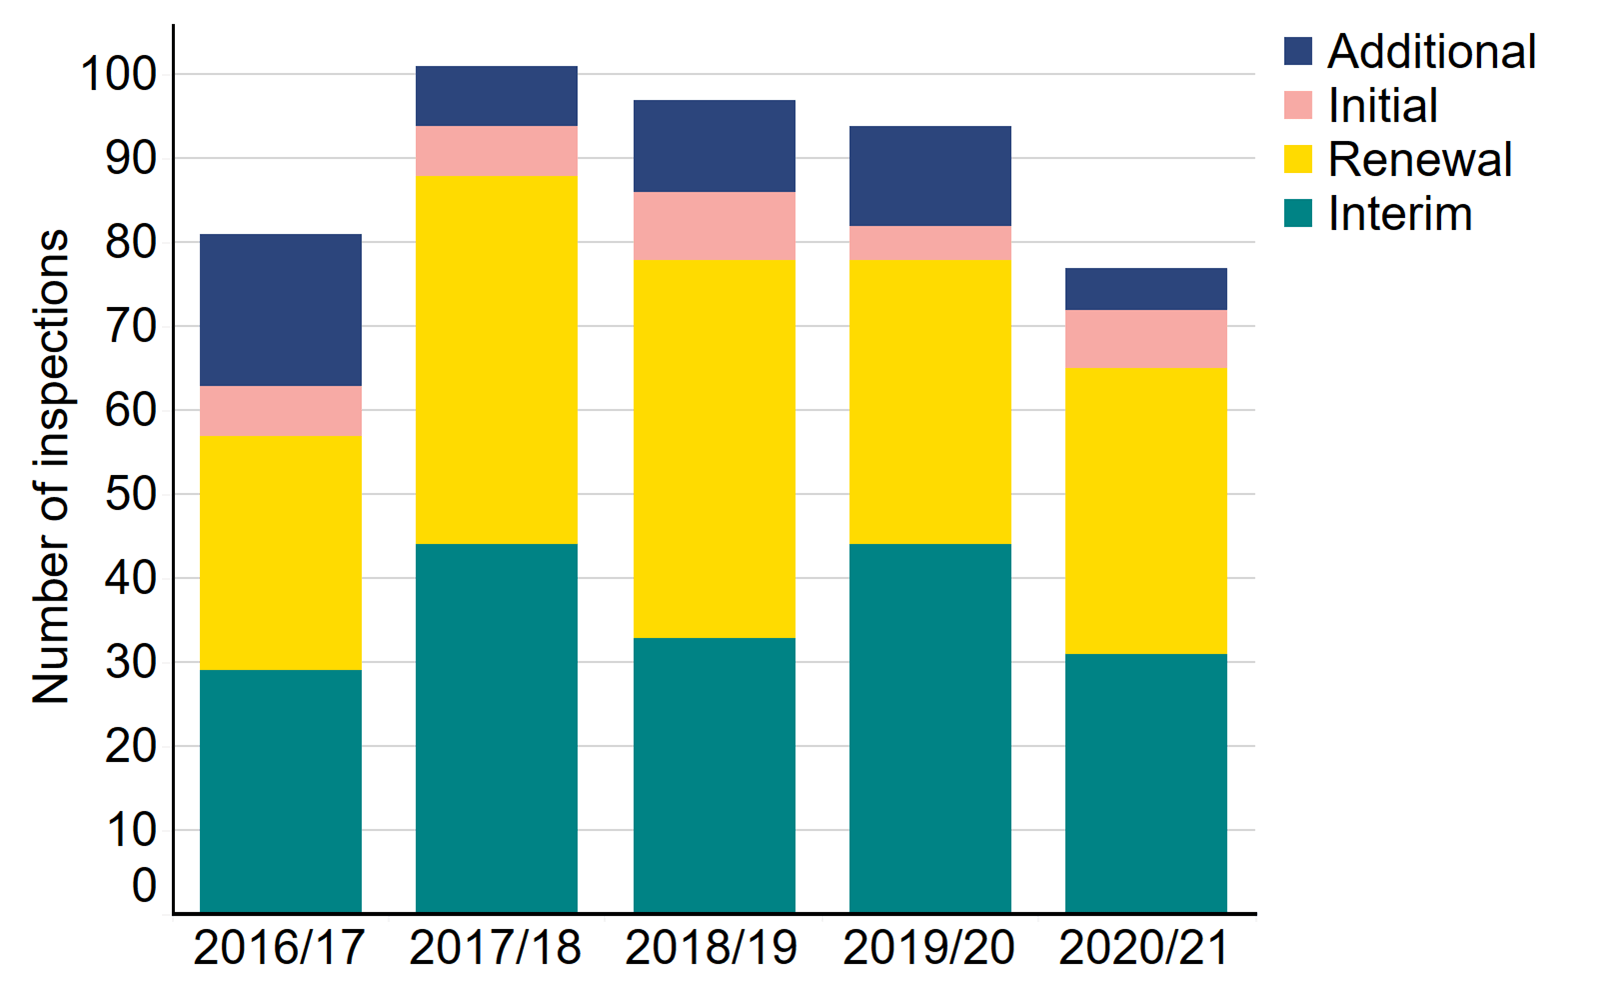 Figure 1: Number of inspections by type, 2016/17 - 2020/21. Number of inspections by type, 2016/17-2020/21. This stacked bar chart shows the number of inspections from 2016/17 to 2020/2021 by type: additional, initial, renewal, interim. Annually, most inspections have been renewal or interim, with a smaller proportion being additional or initial. There was a decrease in the overall number of inspections between 2019/20 and 2020/21, from 94 to 77 respectively. An accessible form of the underlying data for this figure can be downloaded at the start of the report in .xls format.